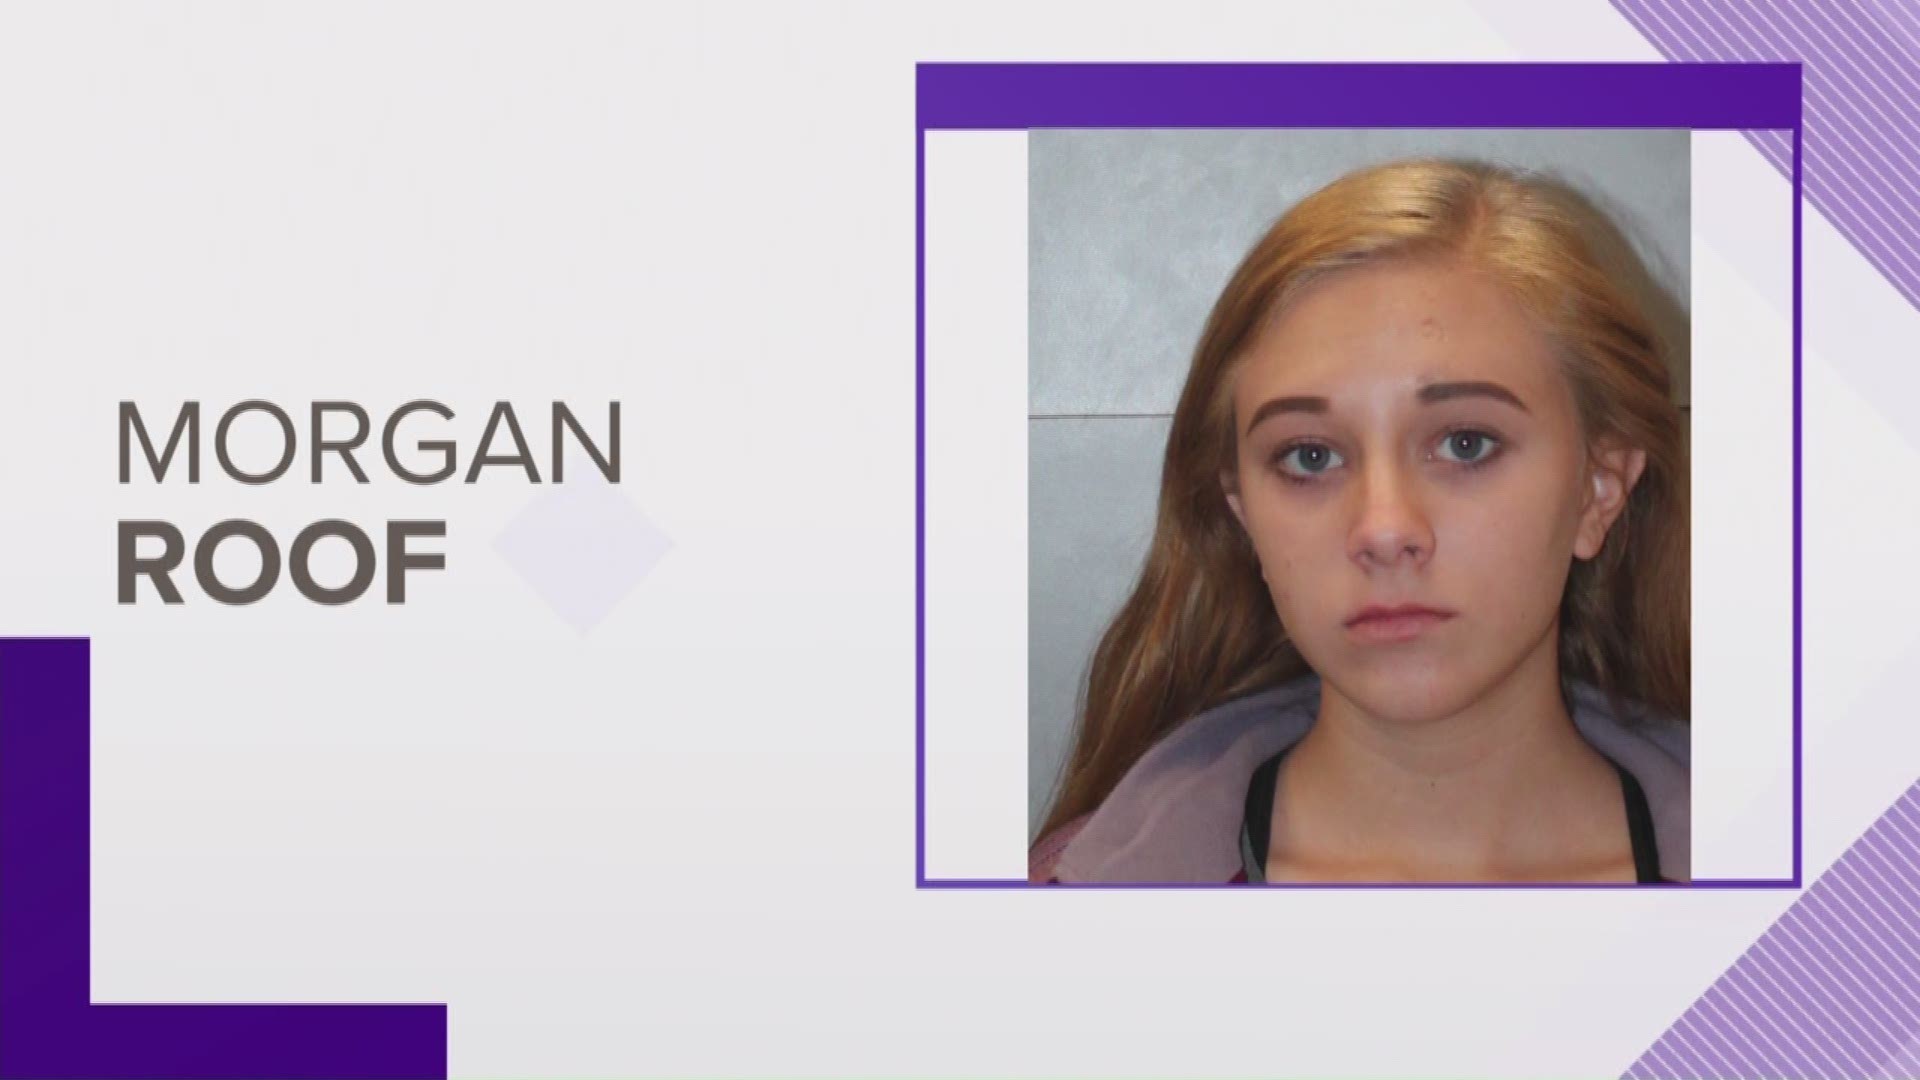 Morgan Roof, the sister of the man convicted of killing nine people at a South Carolina church, was charged with simple possession of marijuana.